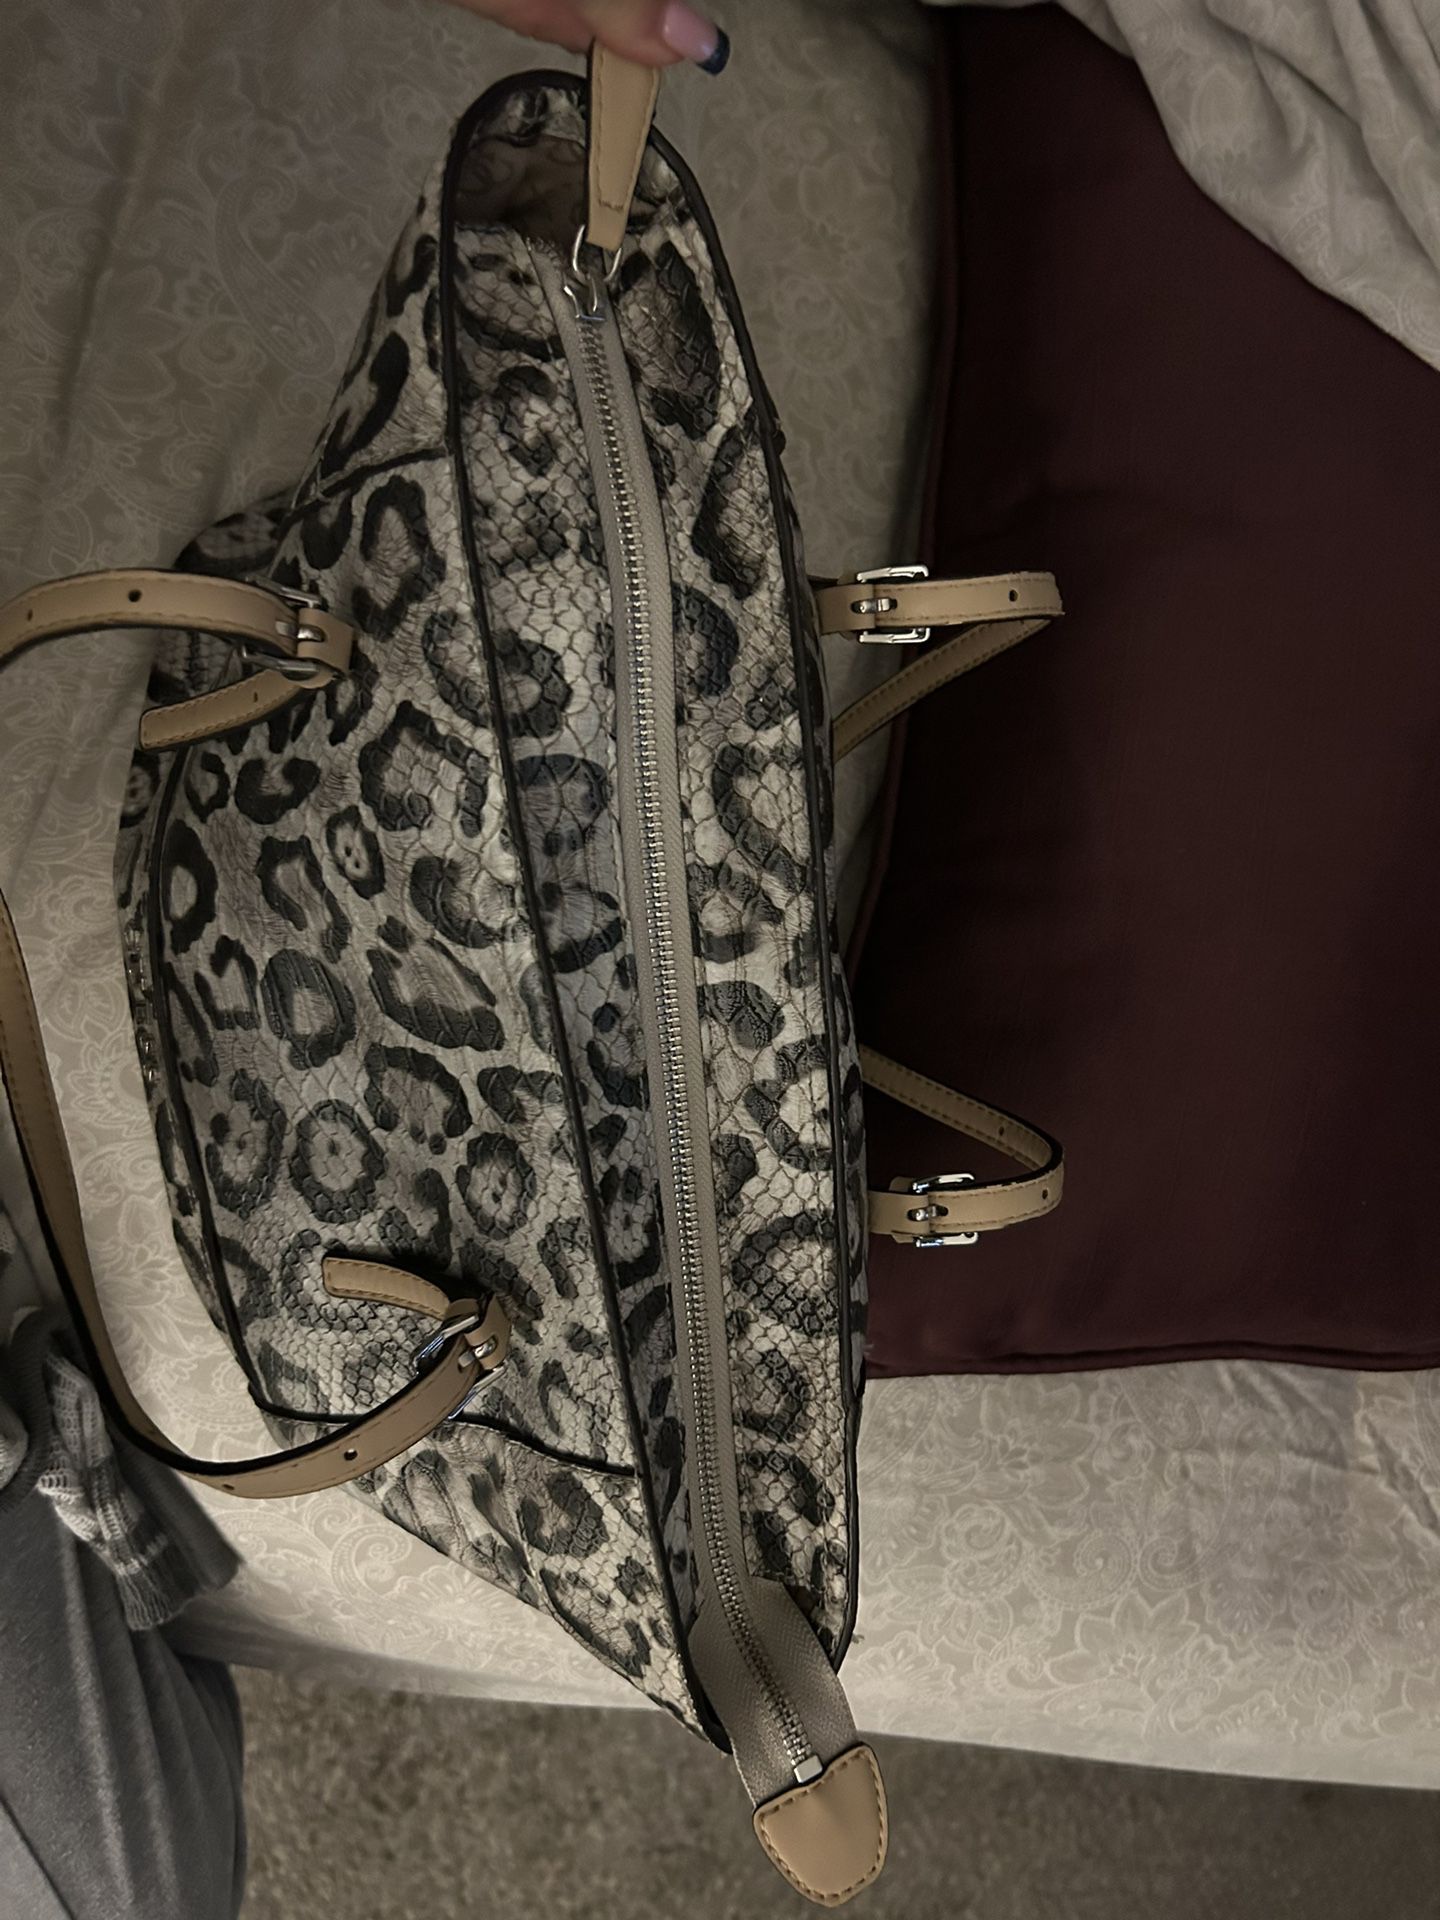 Guess Delaney Leopard Tote (not real)